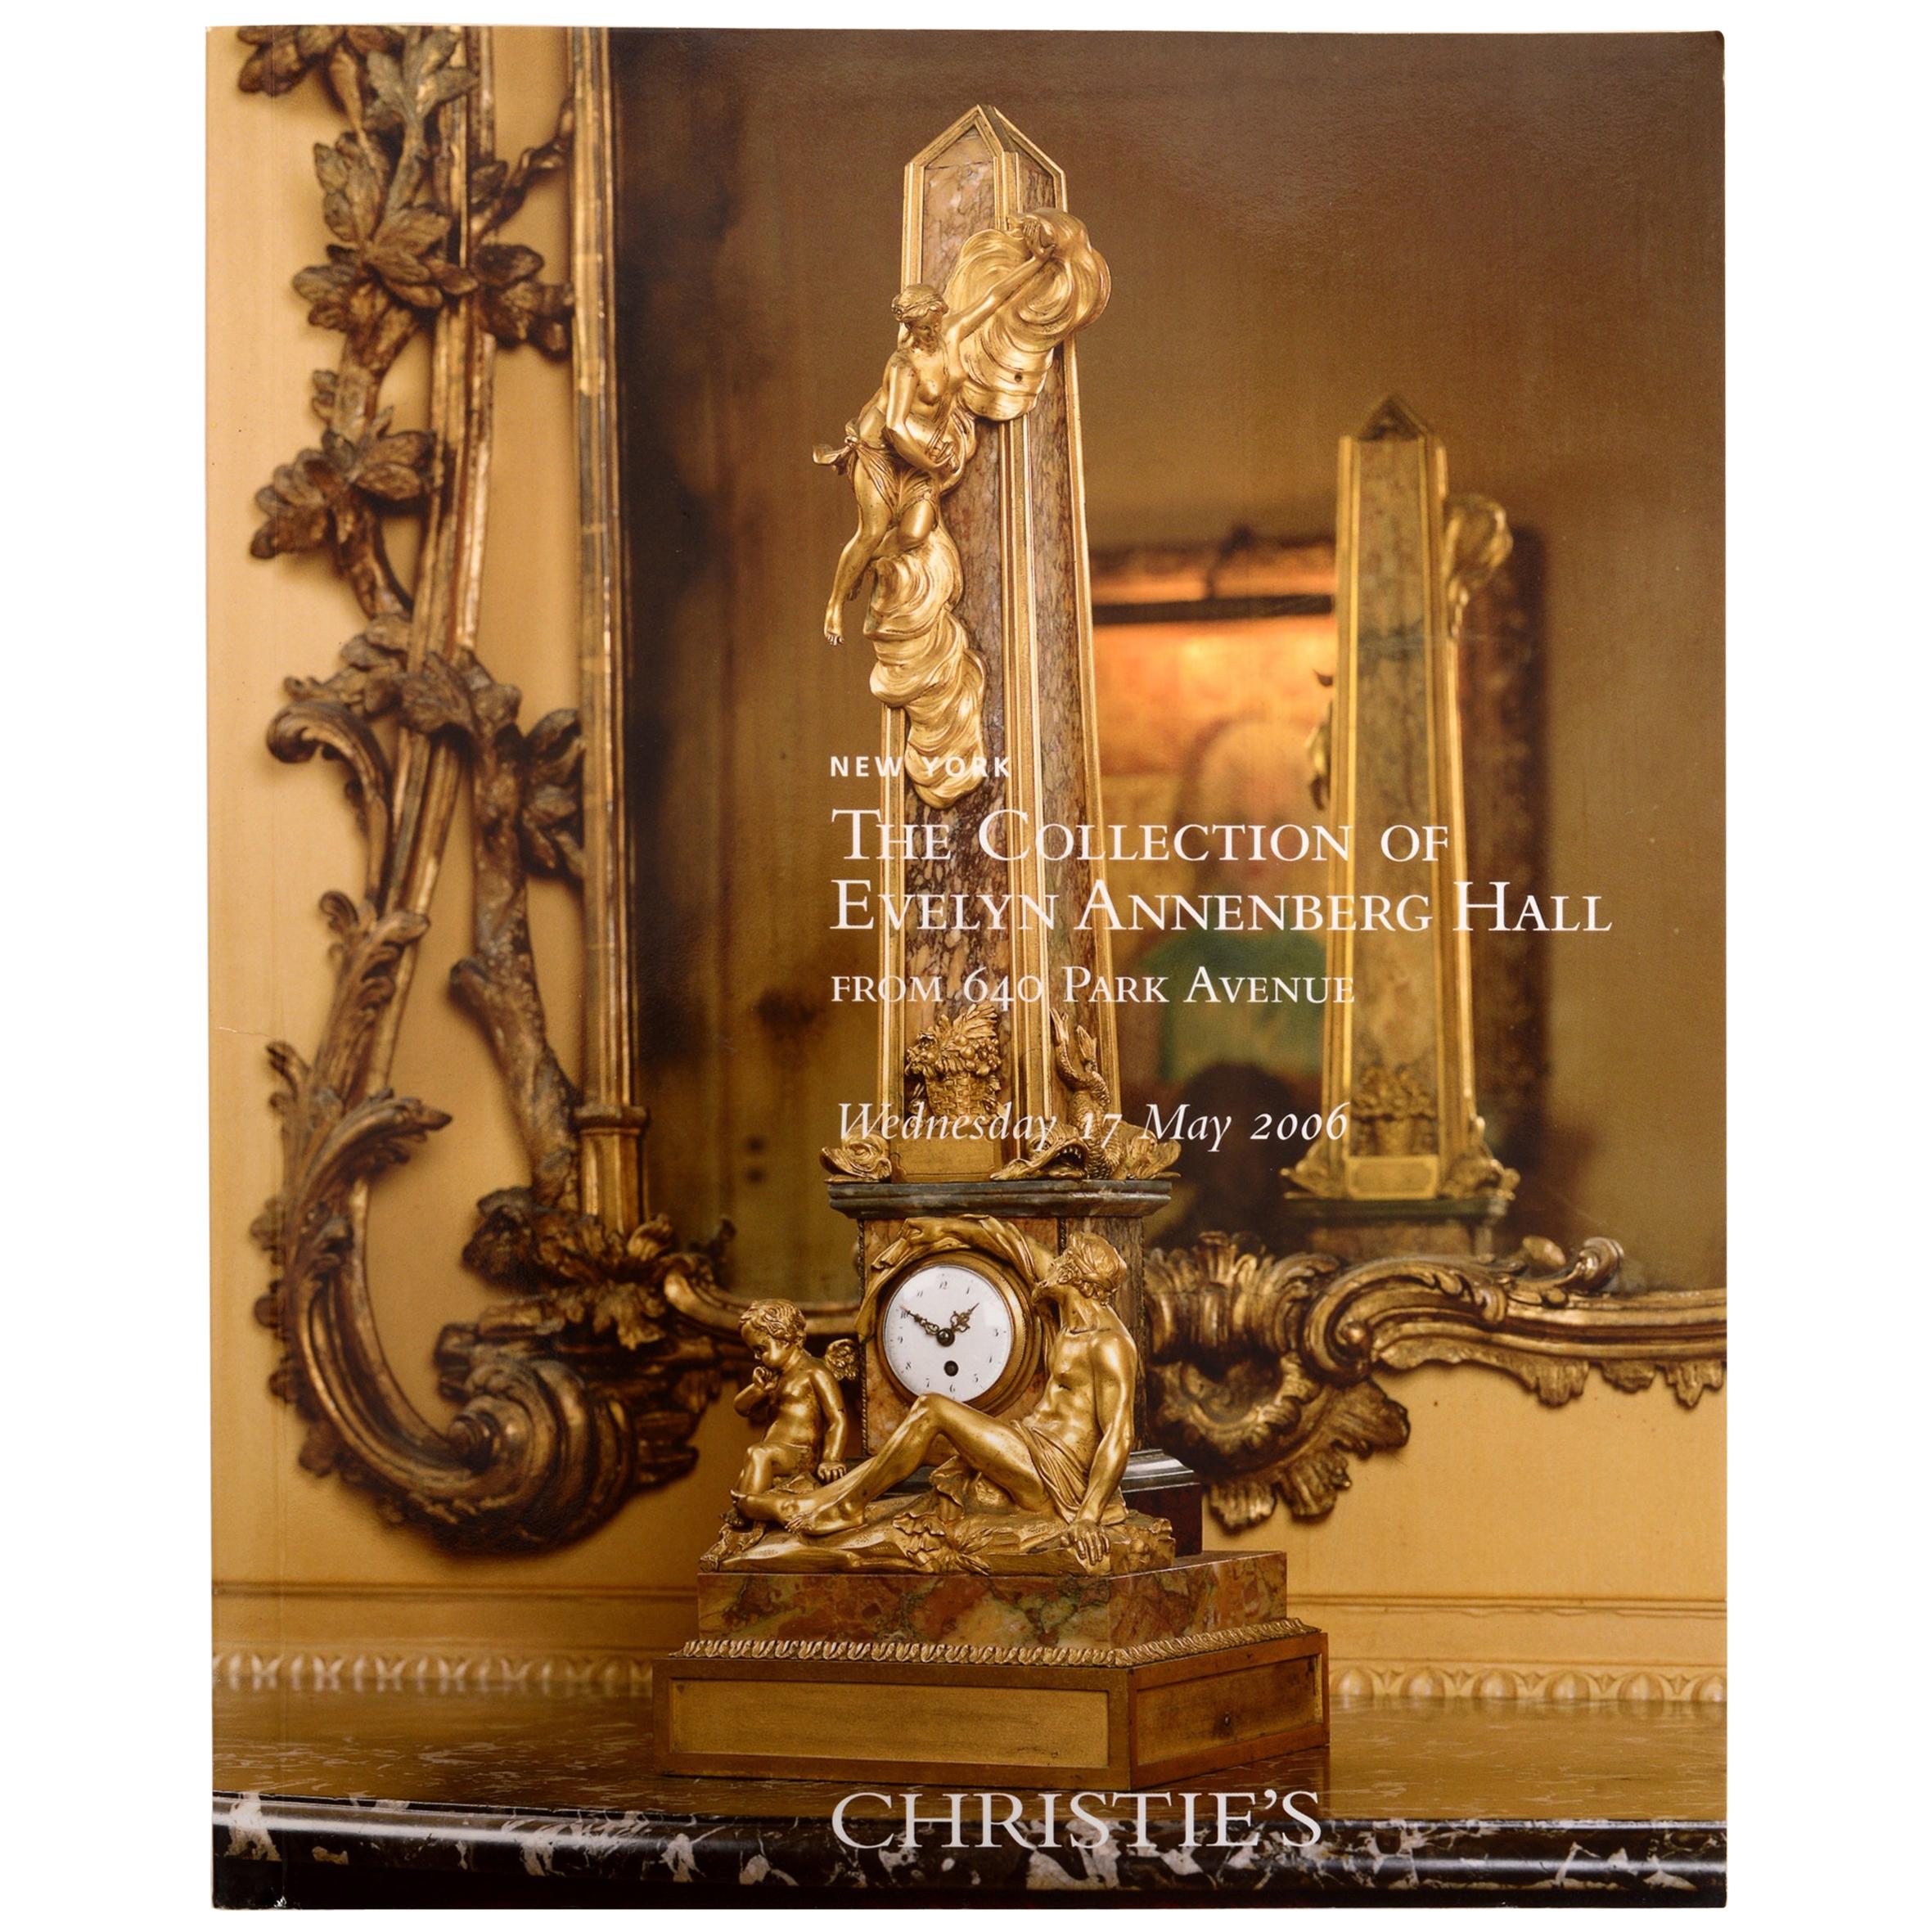 Collection of Evelyn Annenberg Hall, 640 Park Ave Christie's, NY, 2006, 1st Ed